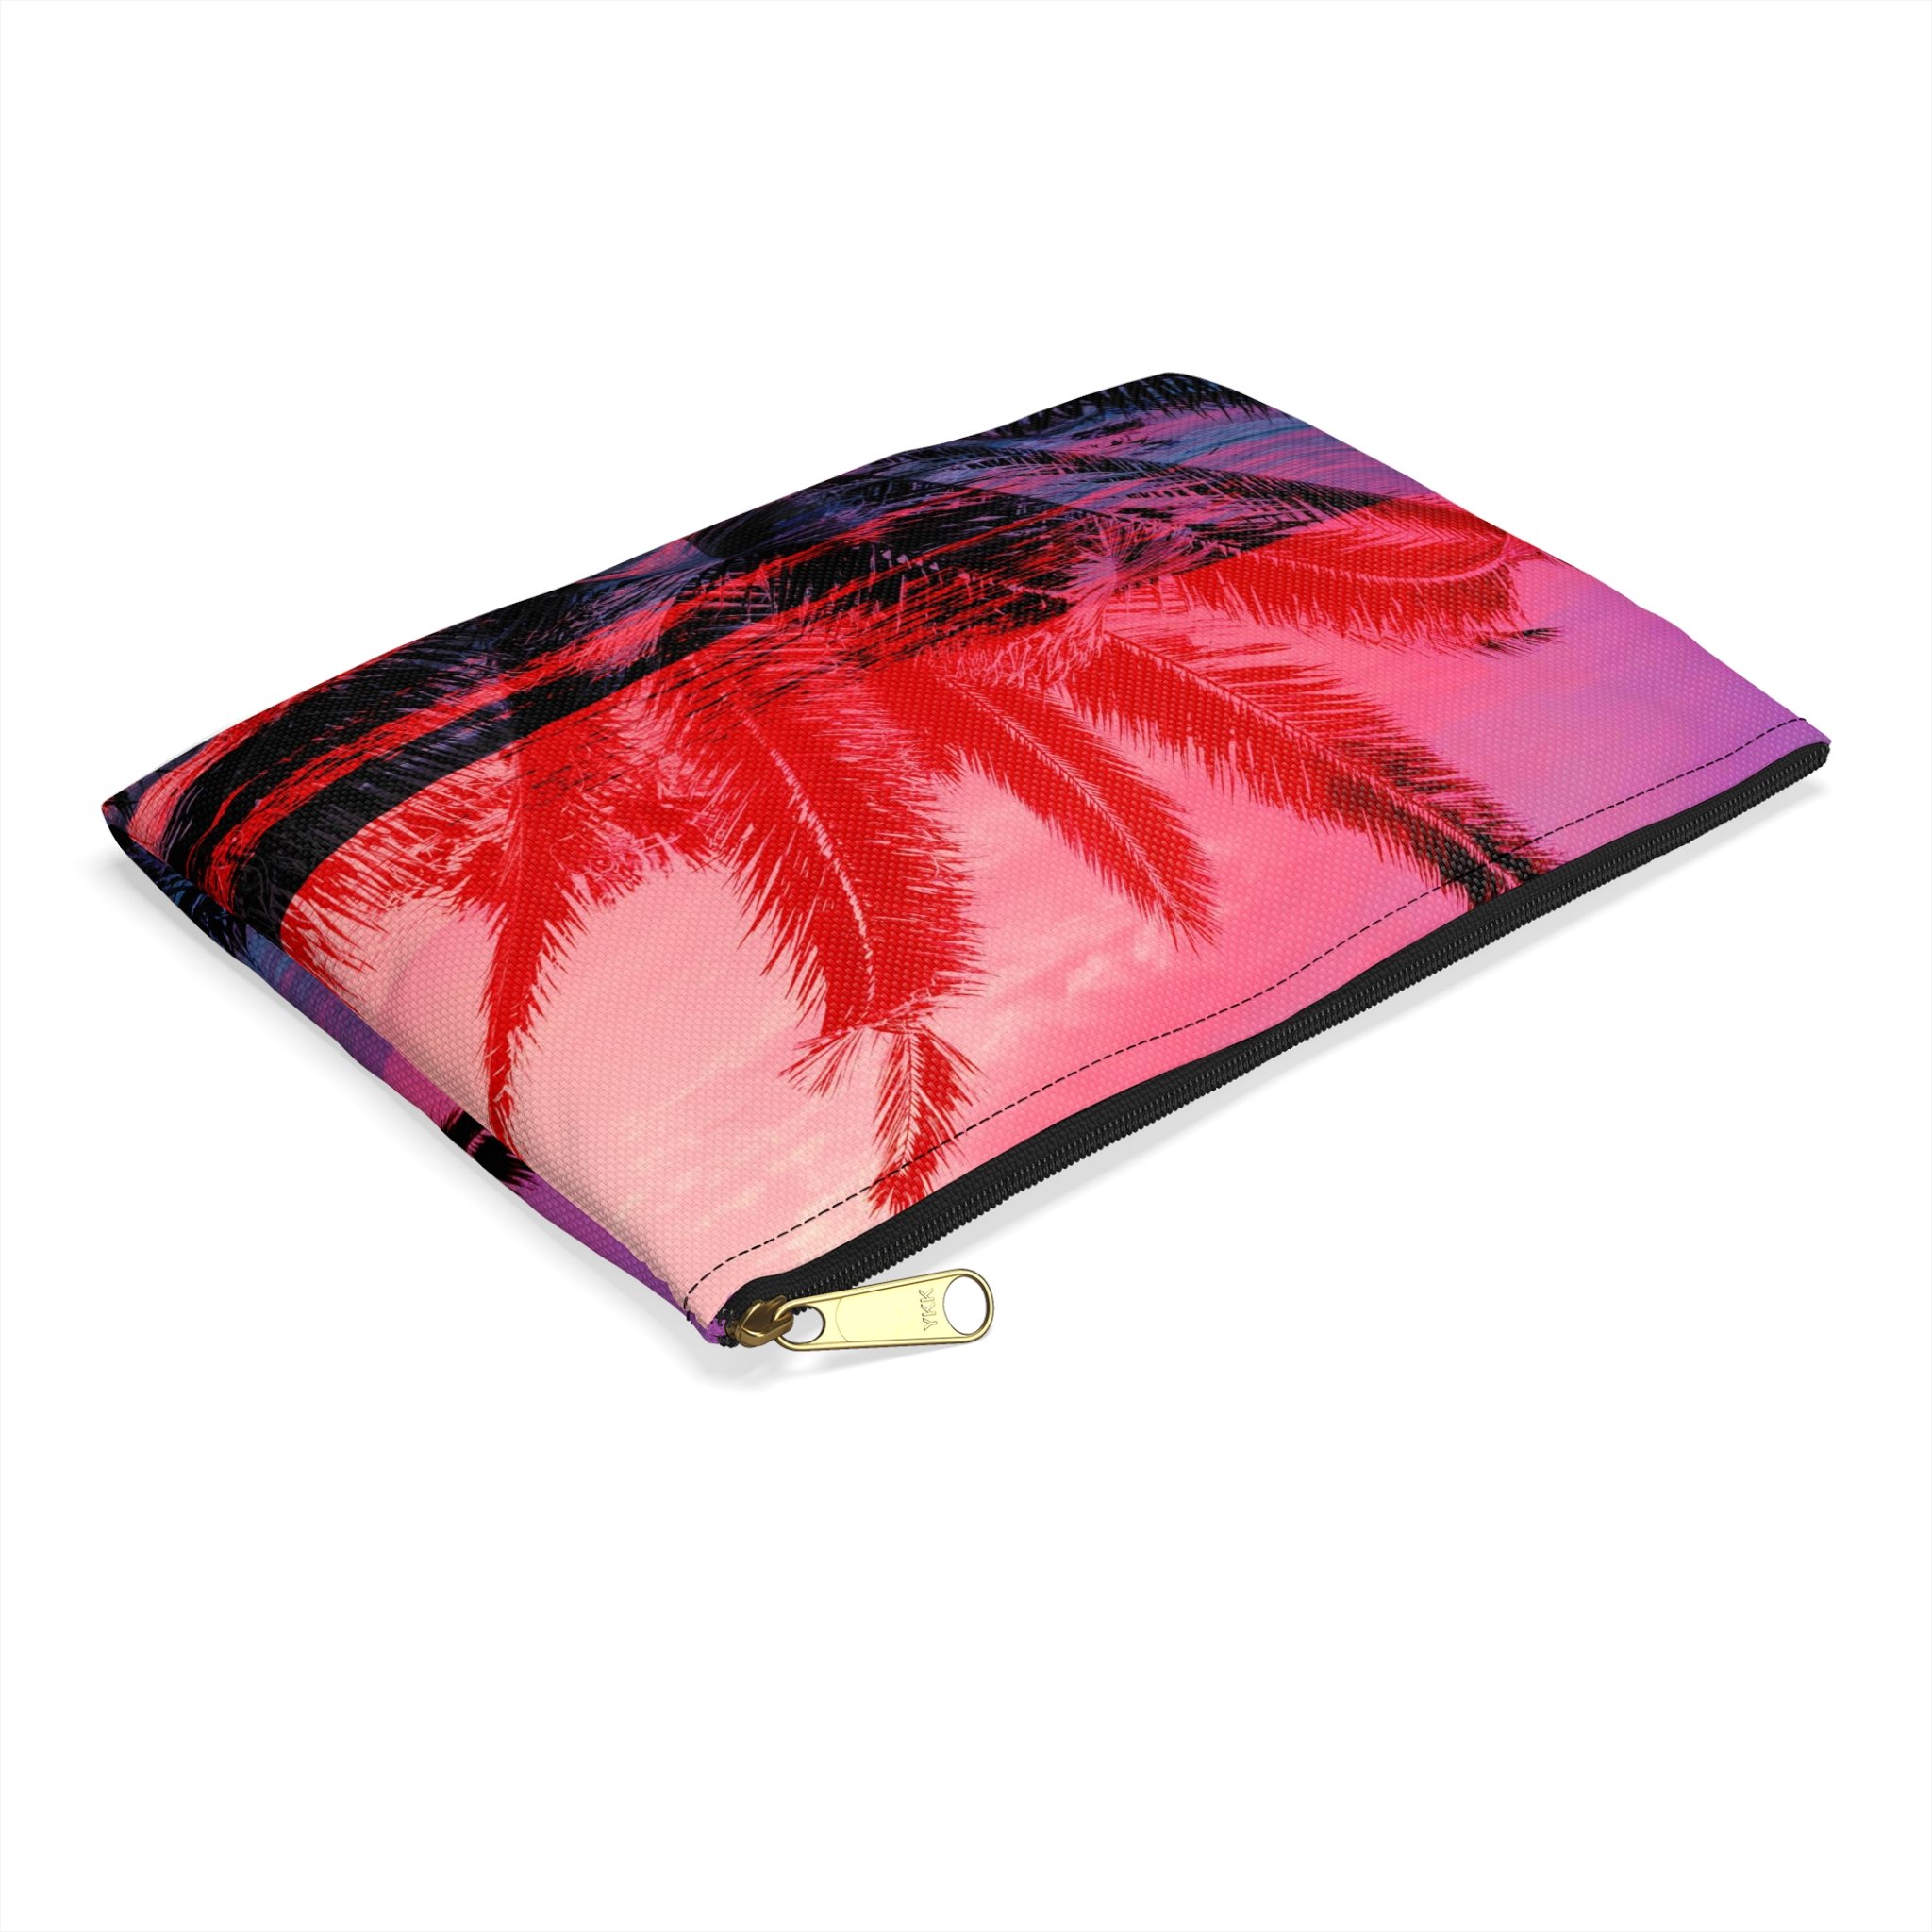 Flamingo Palms - Carry-All Pouch — Beach Surf Decor by Nature | City Co.